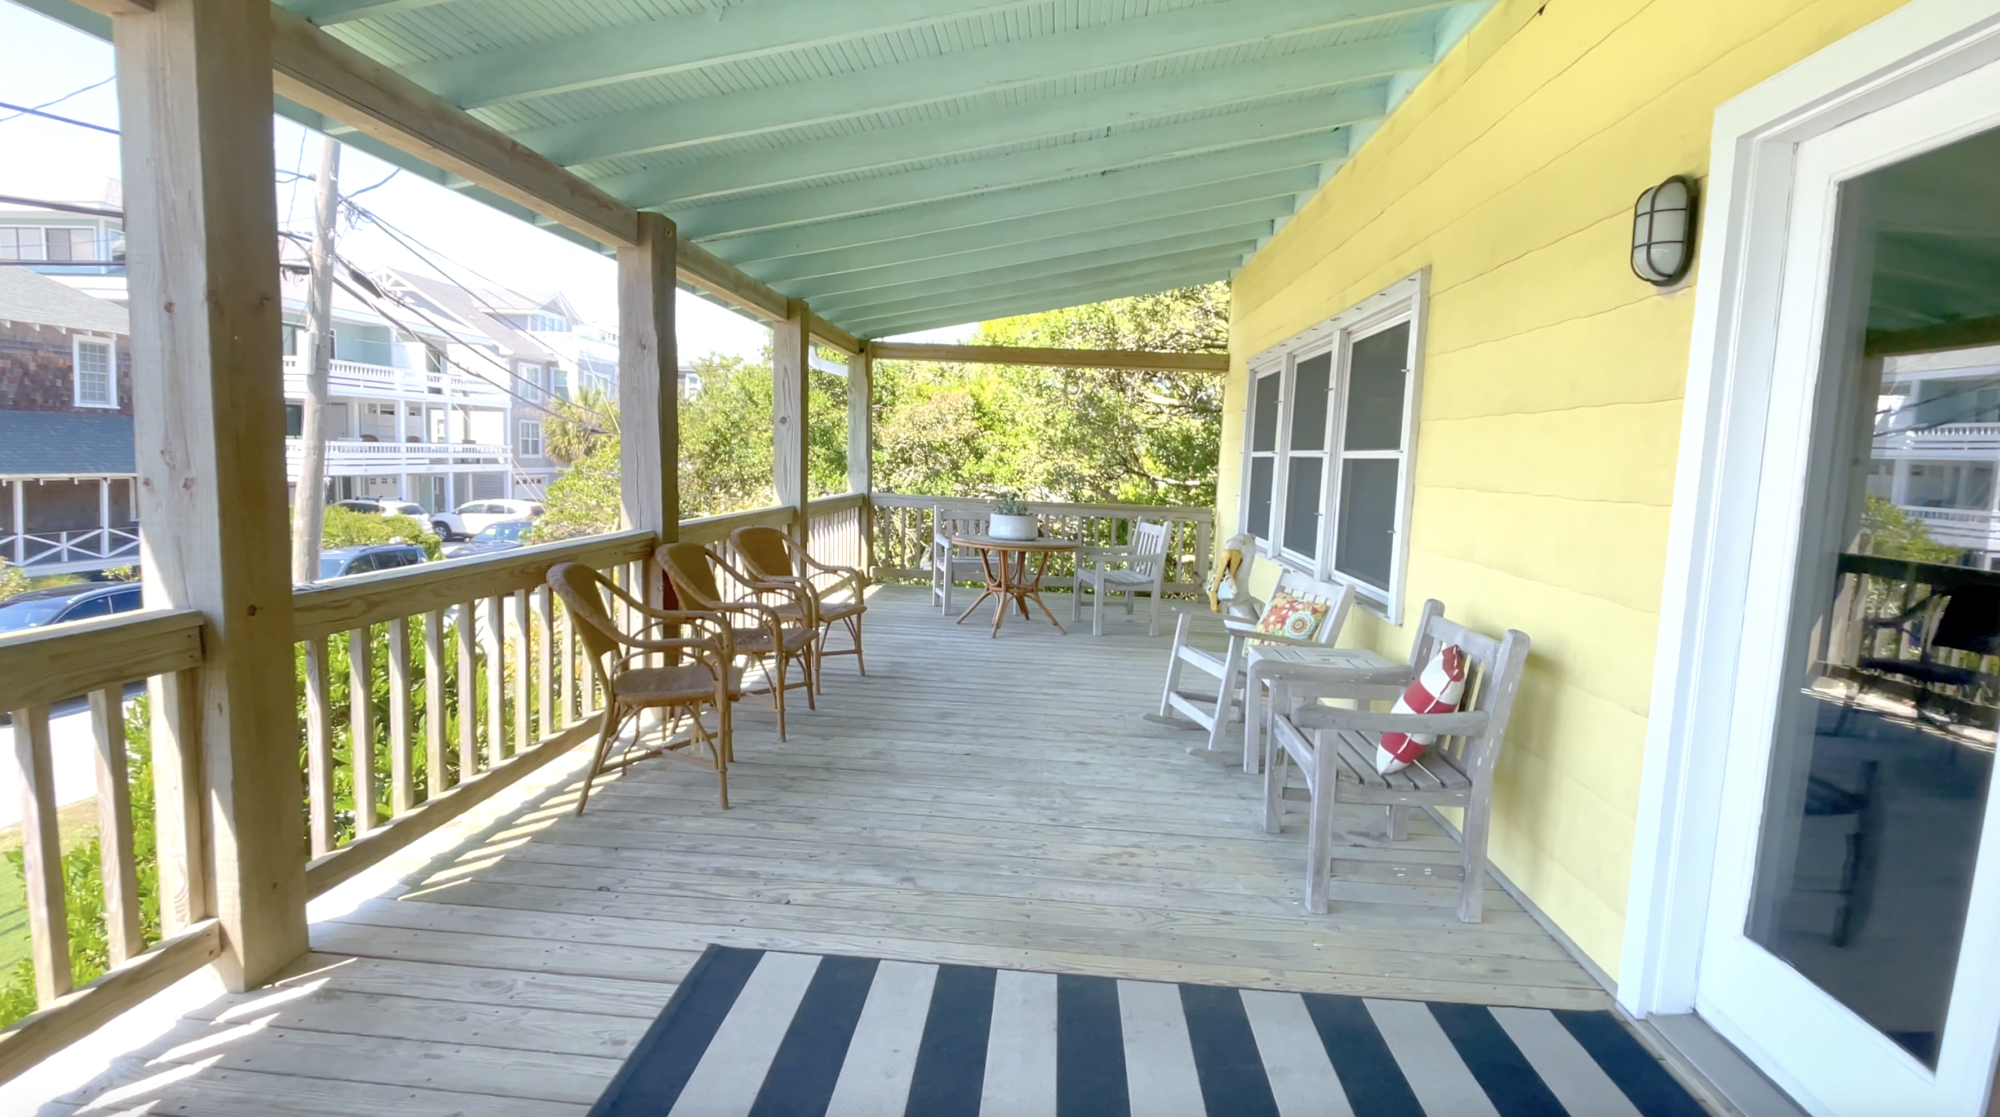 Outdoor deck and seating at The Cottage at Blockade Runner Beach Resort.